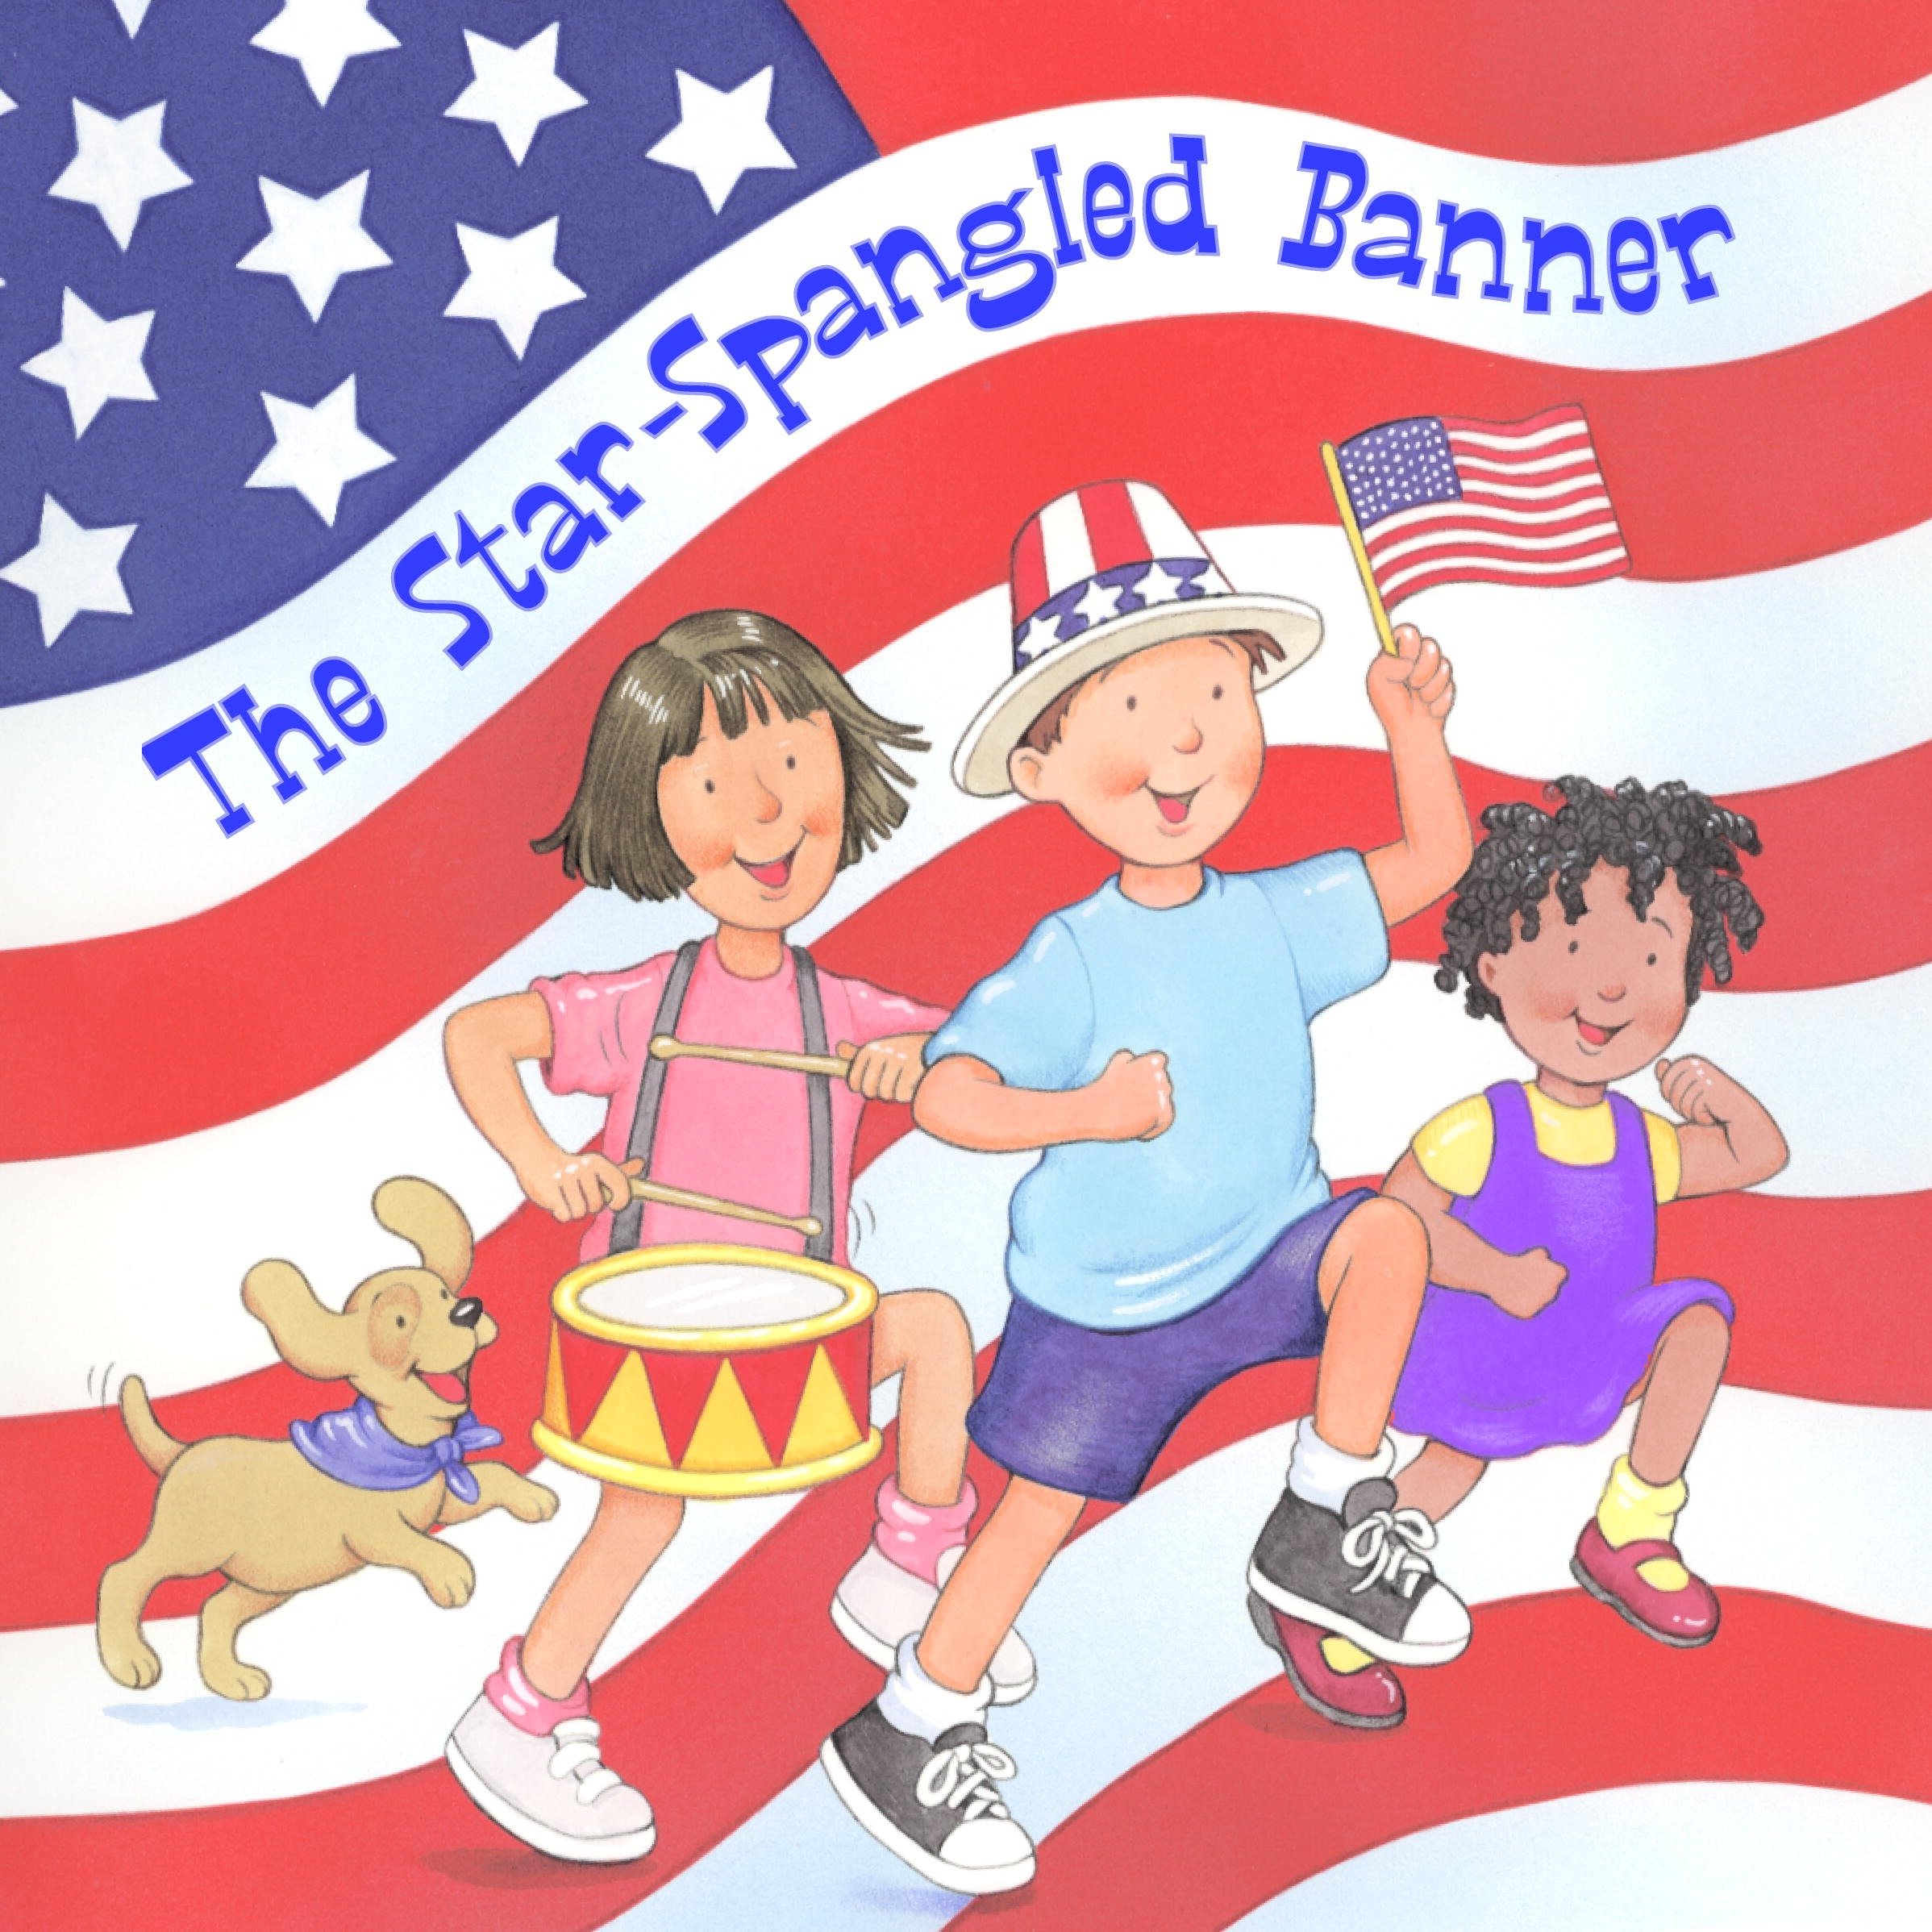 The Star Spangled Banner cover image